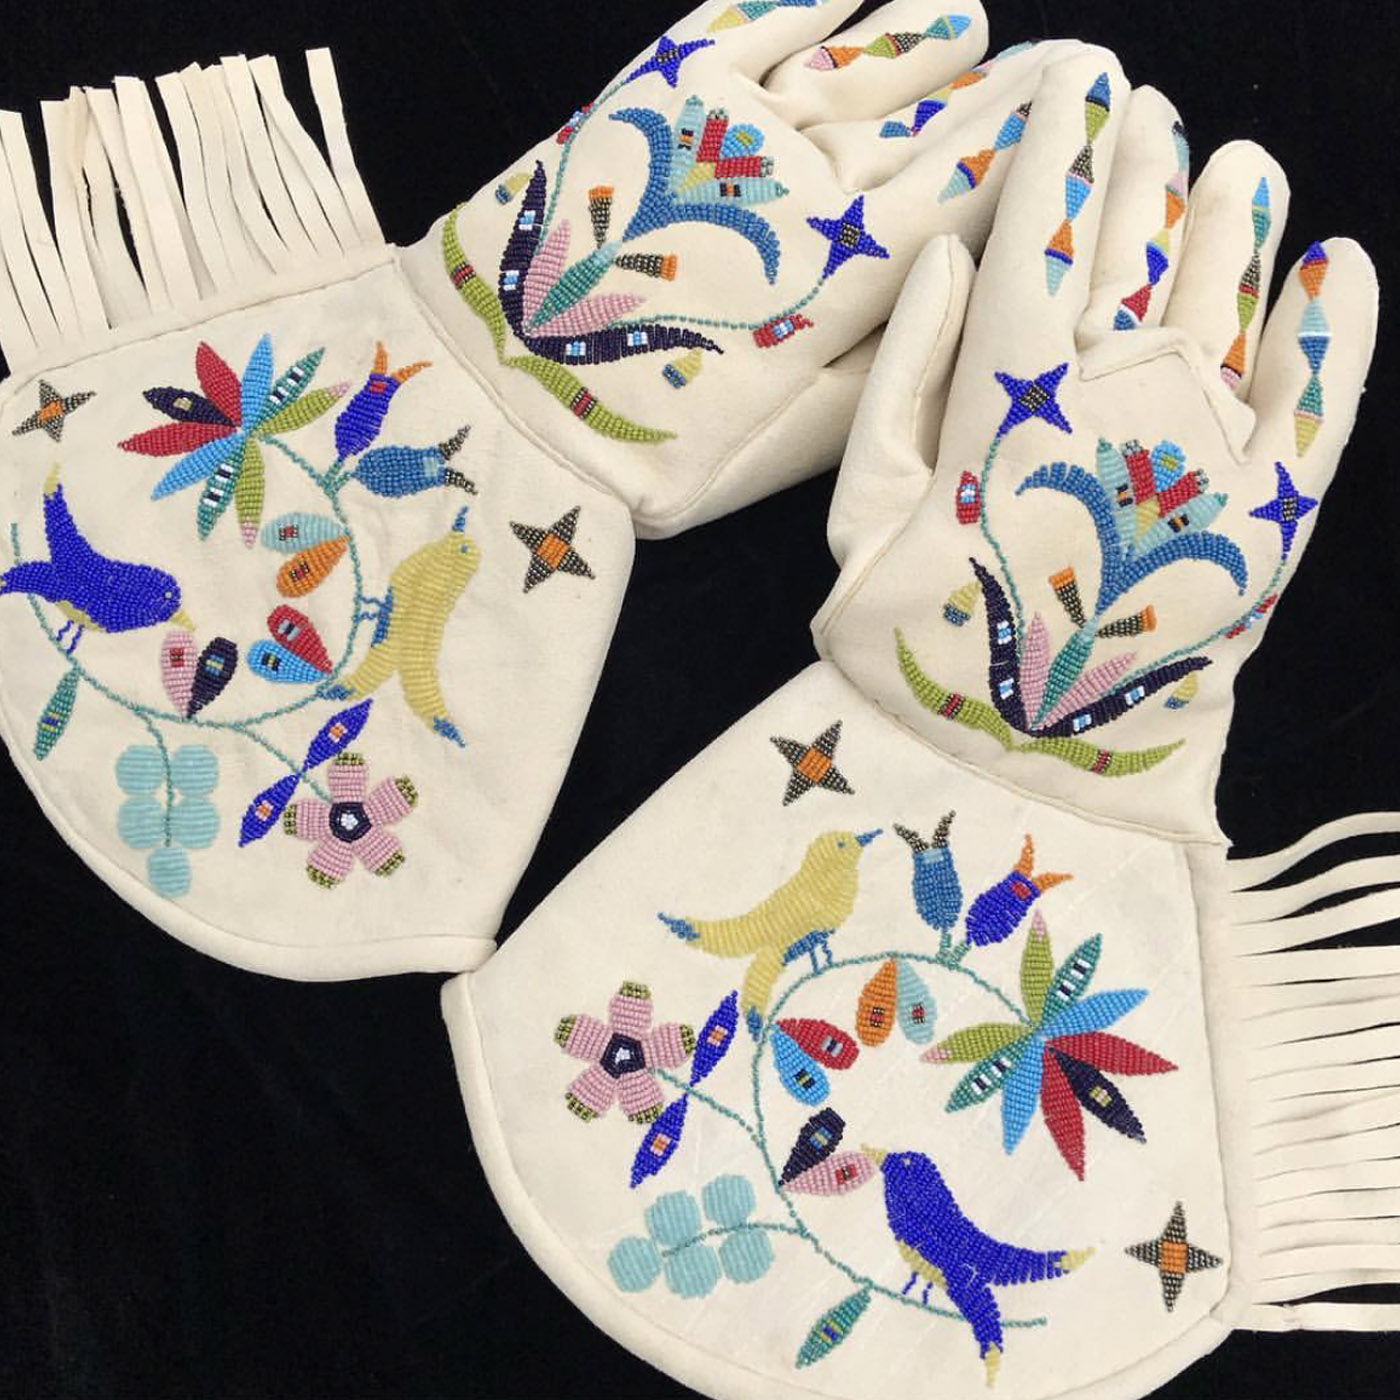 Photograph of a pair of beaded gauntlets handmade by Holly Young. The beaded pattern features an intricate composition of yellow and blue birds standing on an abstract vine of vegetation. The fingers of the gloves hold diamond shaped beadwork. These white gauntlets also feature a fringe.